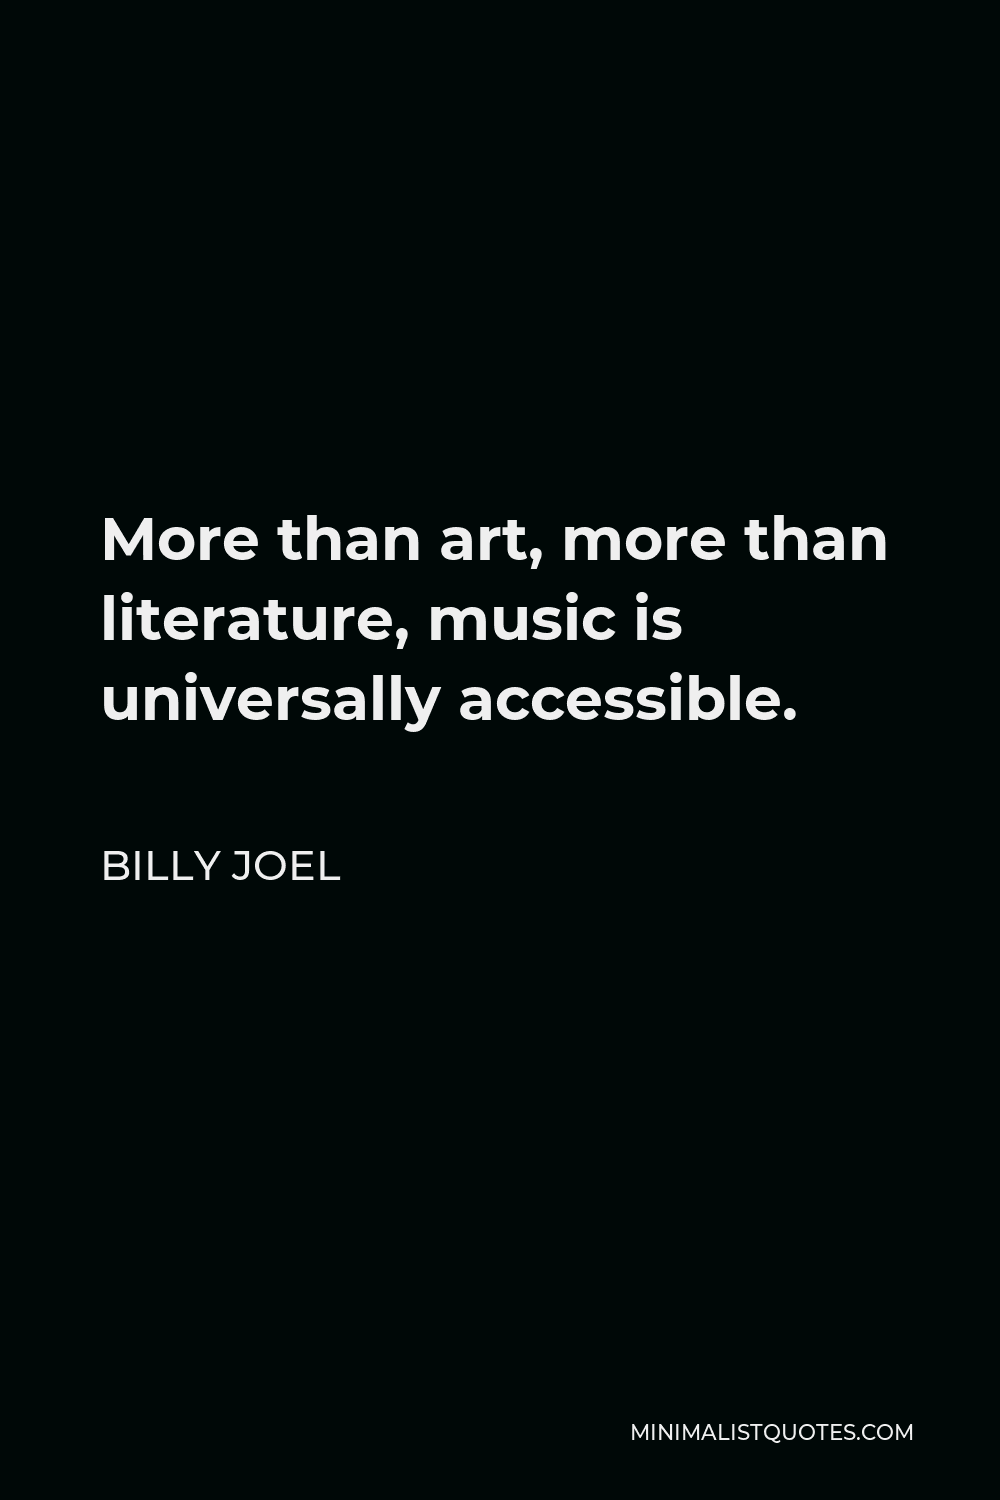 Billy Joel Quote - More than art, more than literature, music is universally accessible.